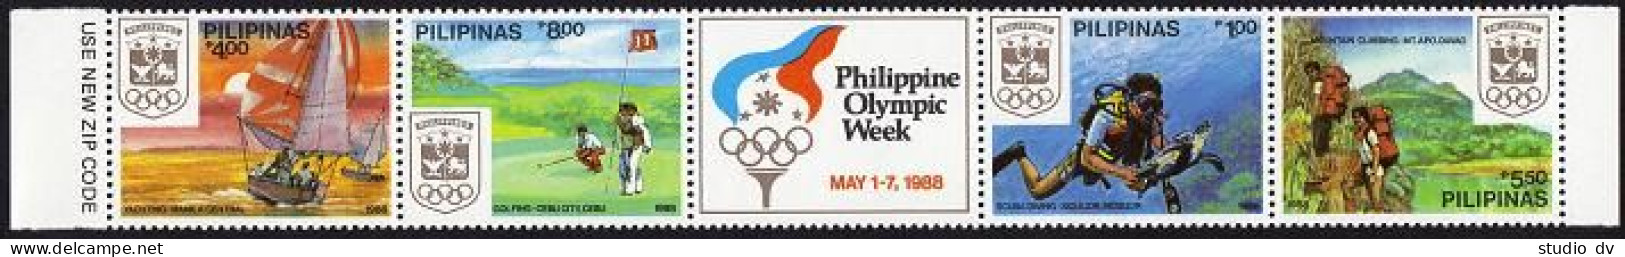 Philippines 1938a Strips Perf,imperf,MNH.Olympic Week 1988.Scuba Diving,Yachting - Filippine